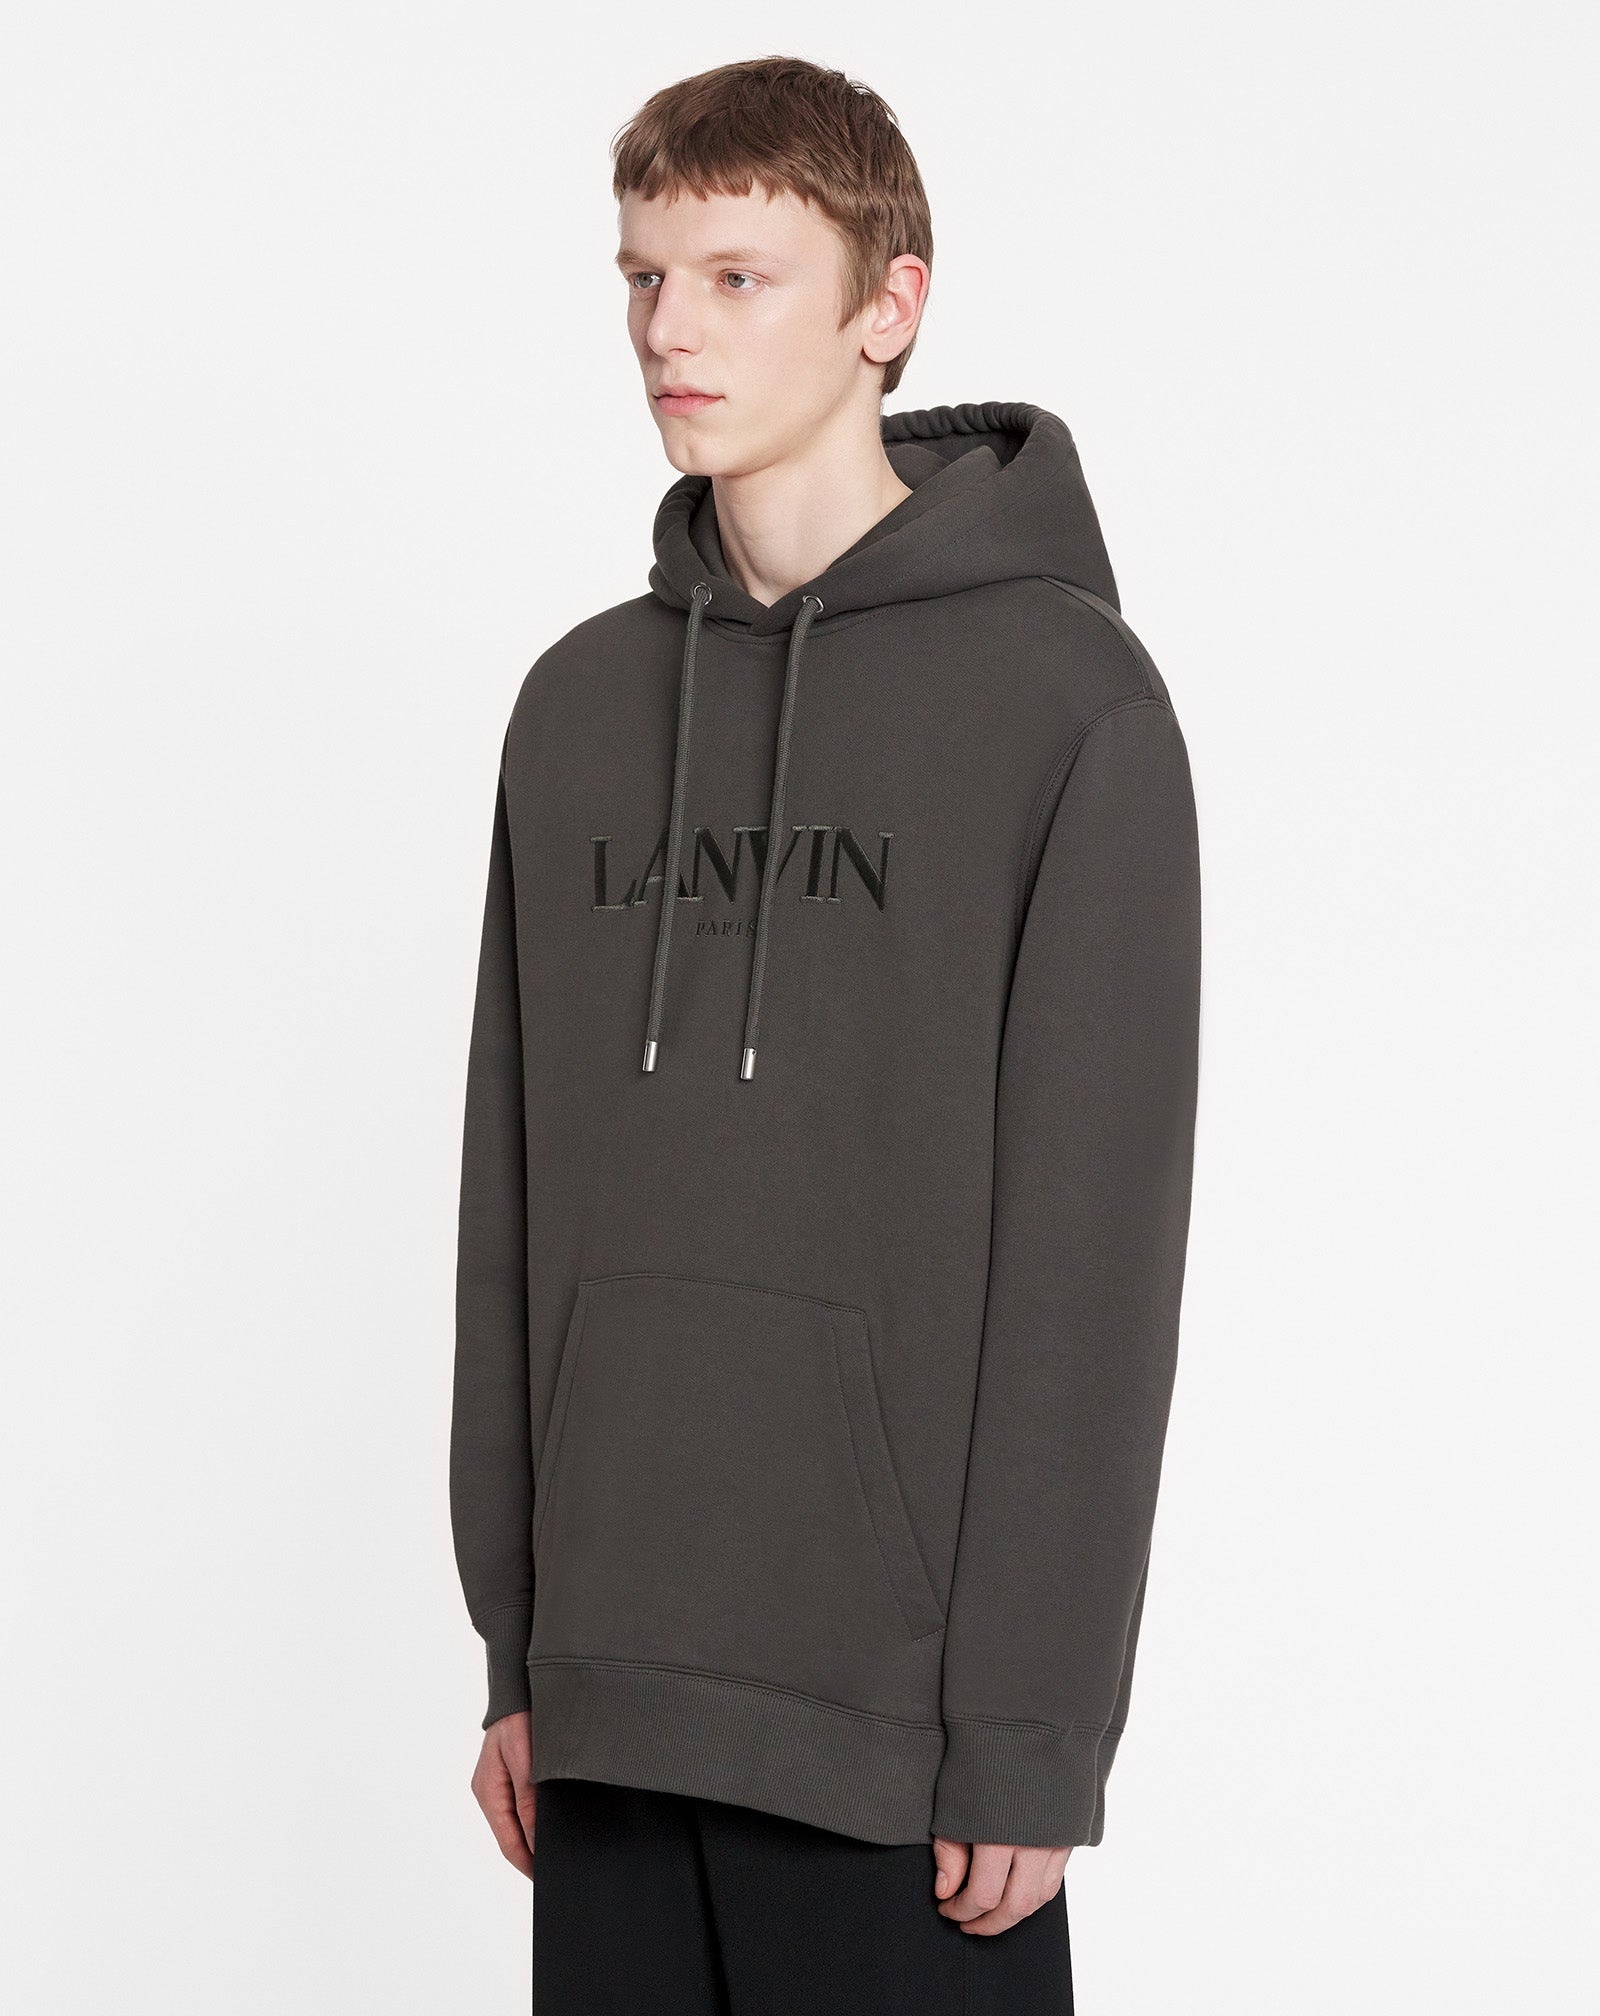 OVERSIZED LANVIN PARIS EMBROIDERED HOODIE - 3